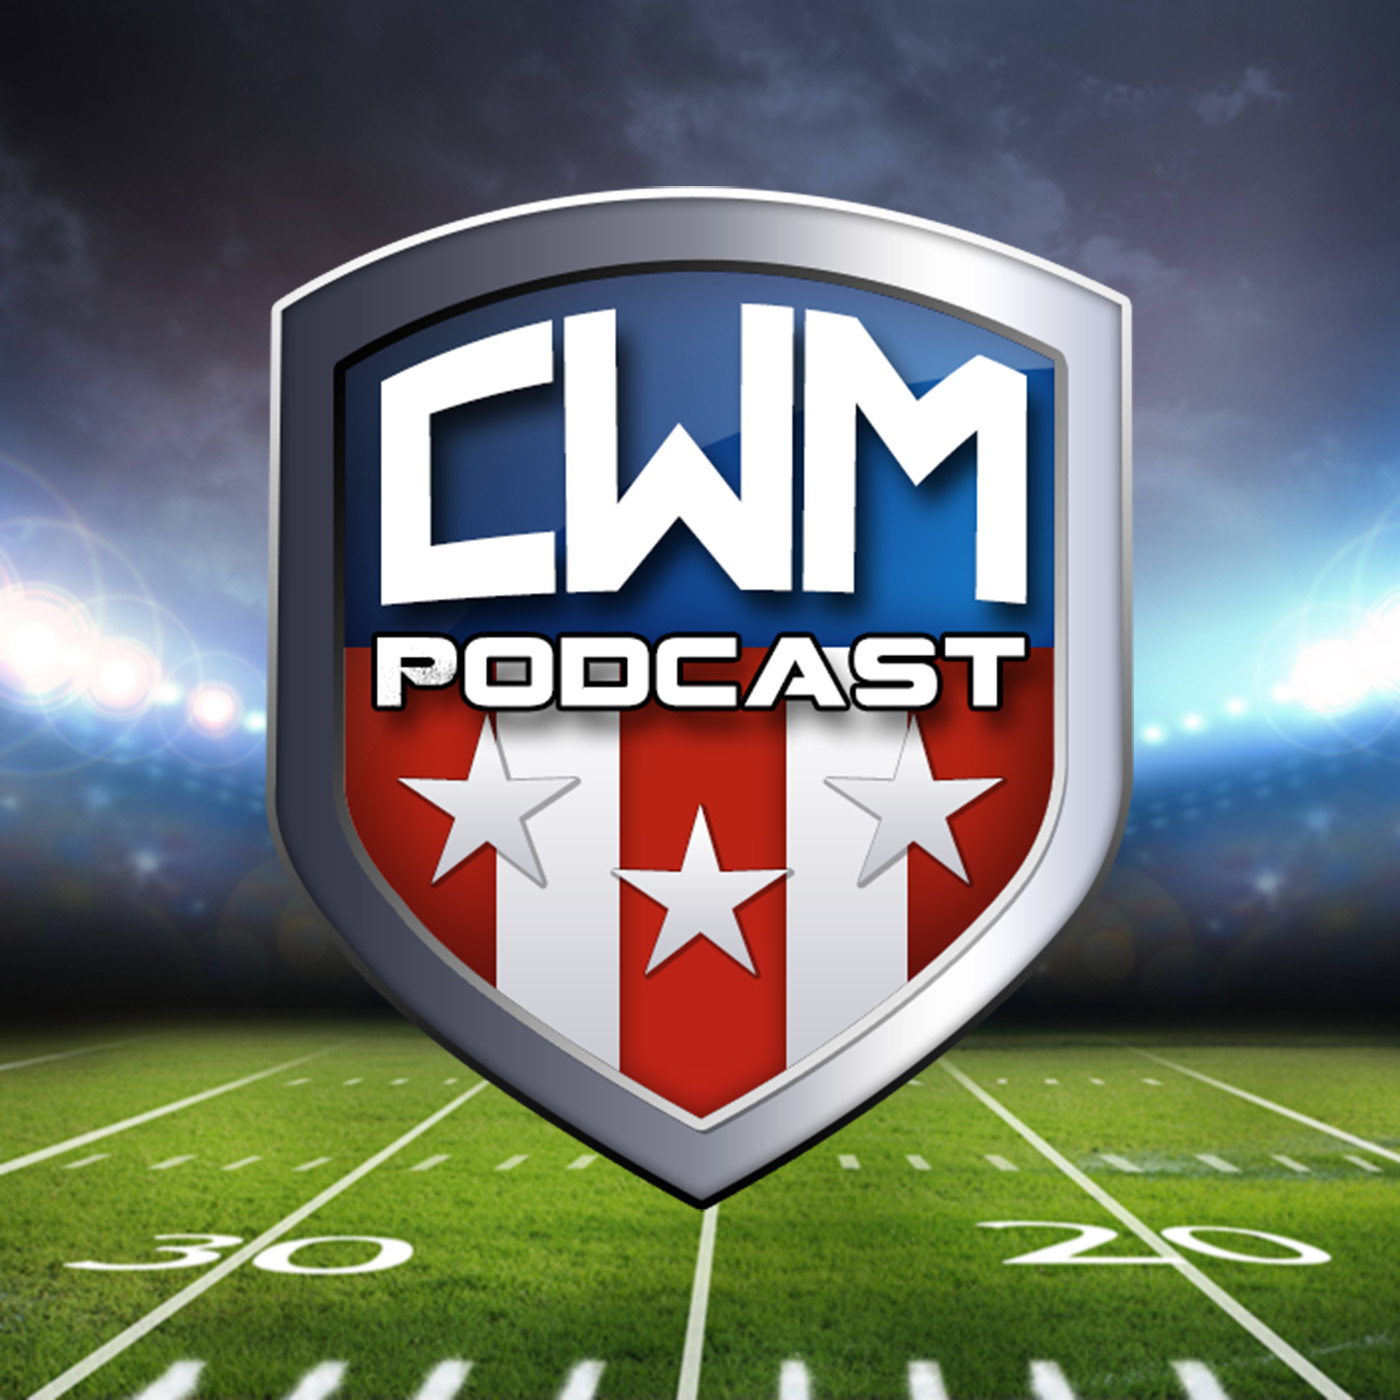 NFL ACL injuries with Dr. David Chao, Quarterbacks with Benjamin Allbright - CWM016